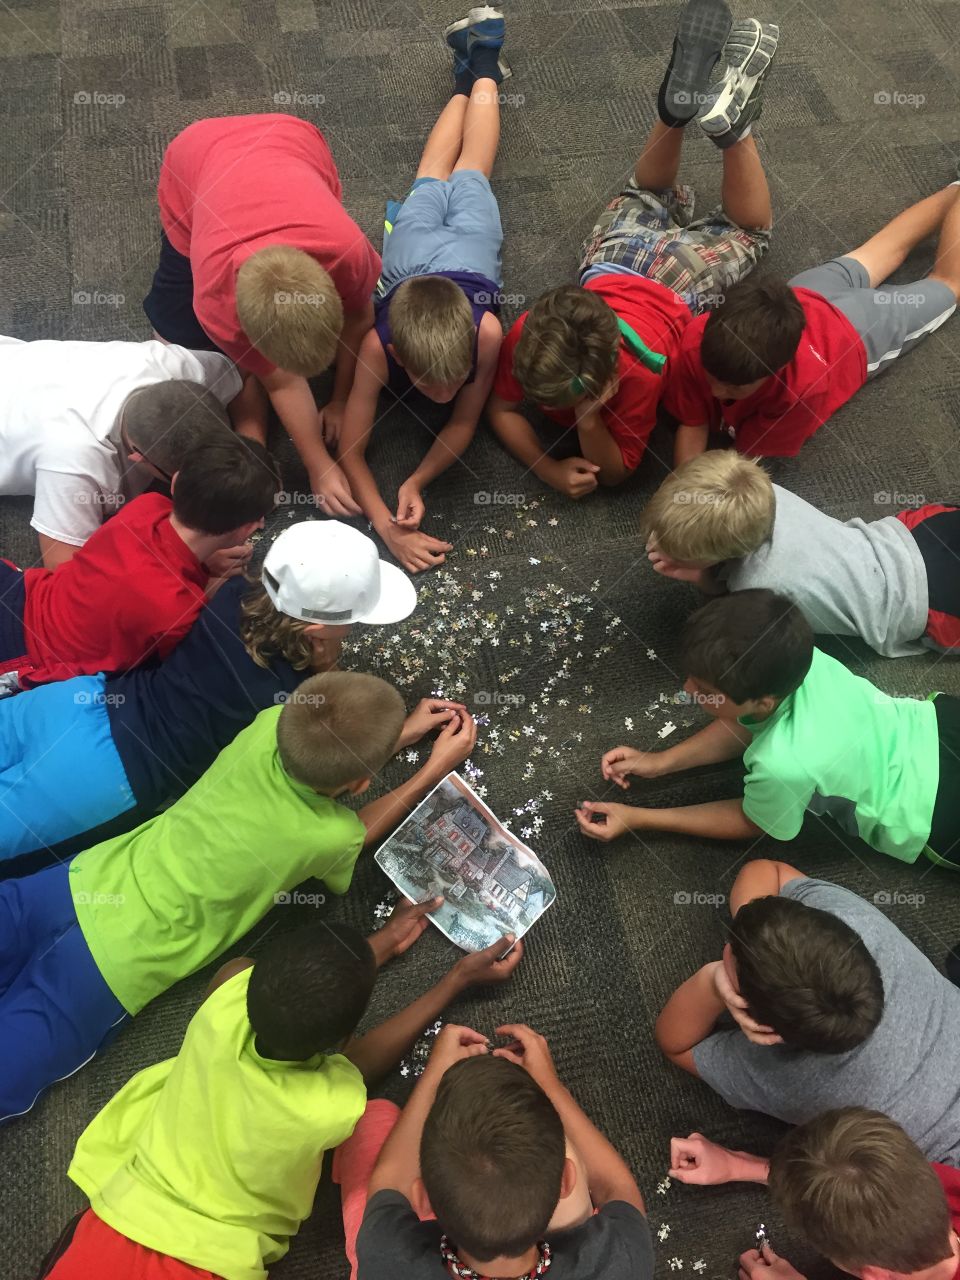 A group of boys work together to assemble a 500-piece puzzle